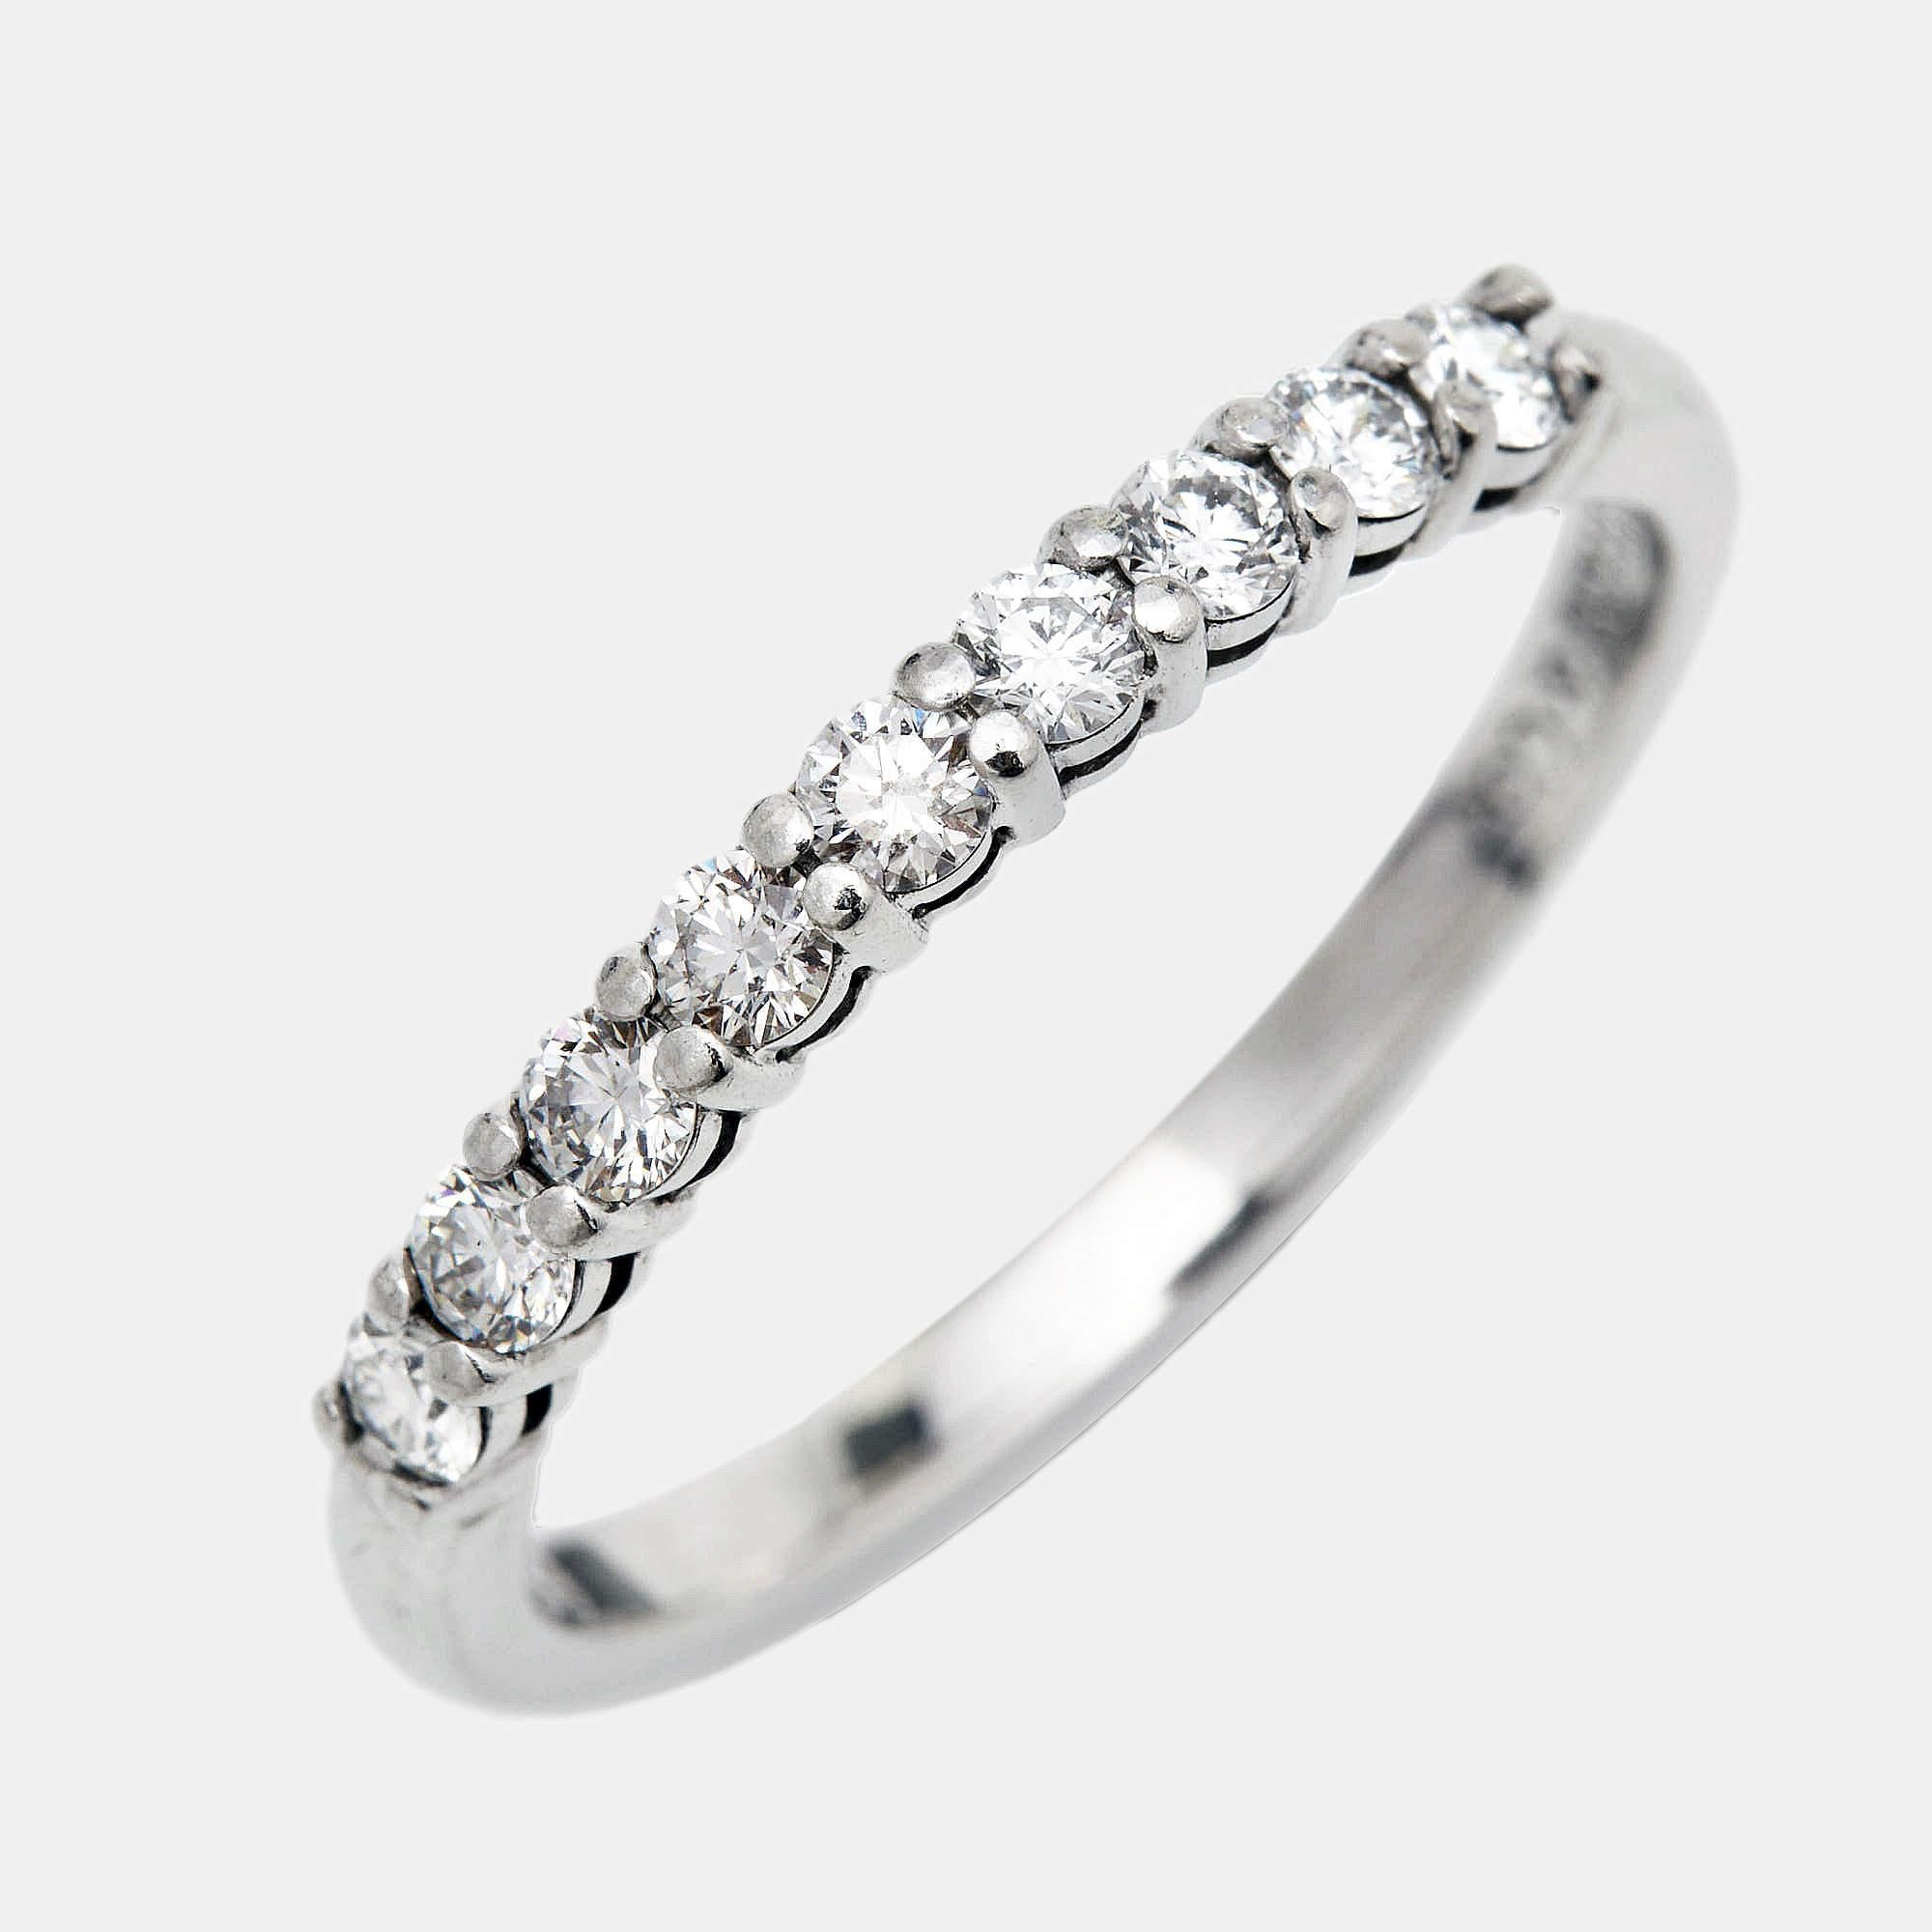 The Tiffany & Co. Forever Eternity ring is an exquisite piece of jewelry crafted with timeless elegance. Made from luxurious platinum, it features a half circle of sparkling, brilliant-cut diamonds, symbolizing eternal love and commitment in a